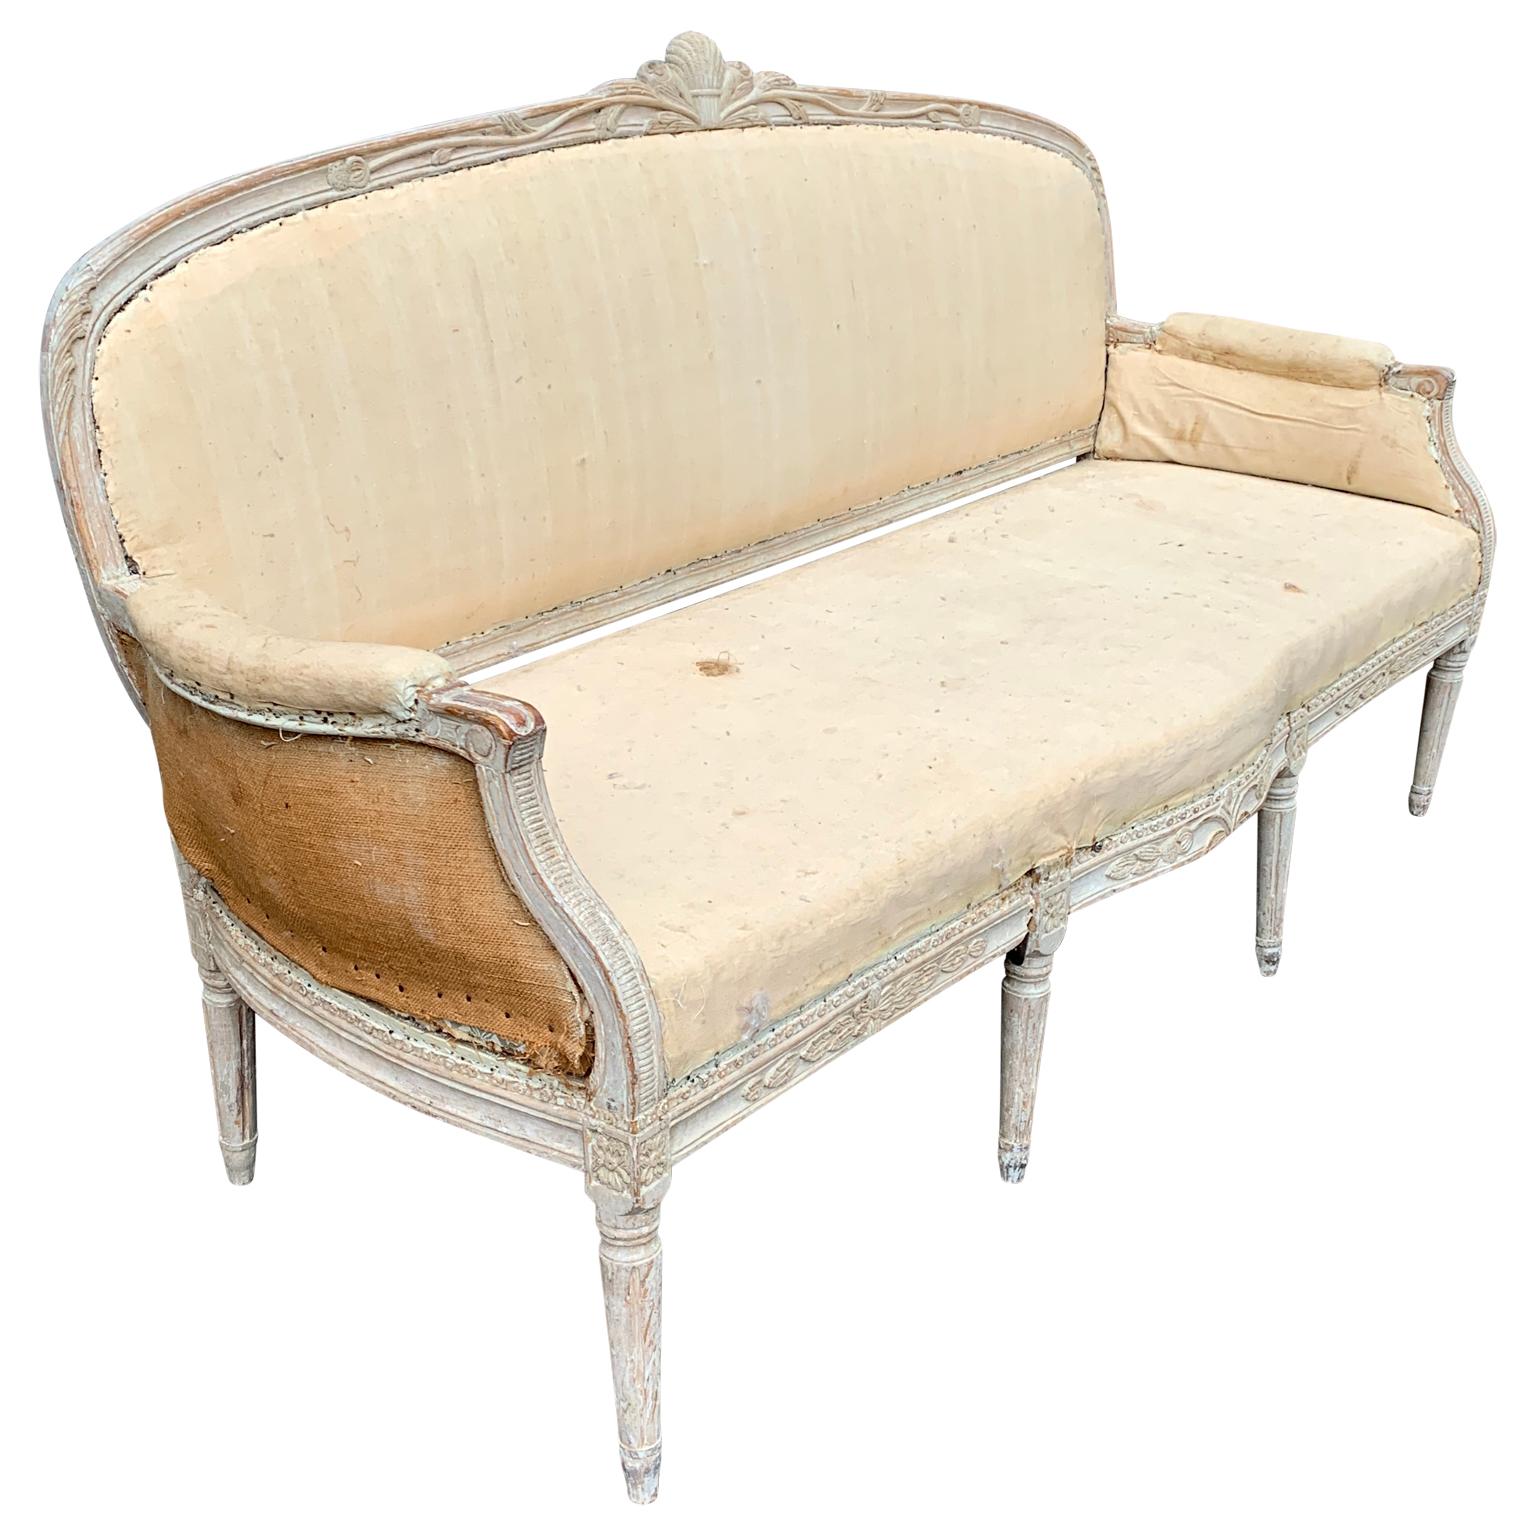 End of 18th century Swedish Gustavian Sofa or Daybed, featuring greyish old paint and its original patina. Sofa has carefully and professionally been hand scraped to rediscover the old original color by our highly specialized restoring team. This